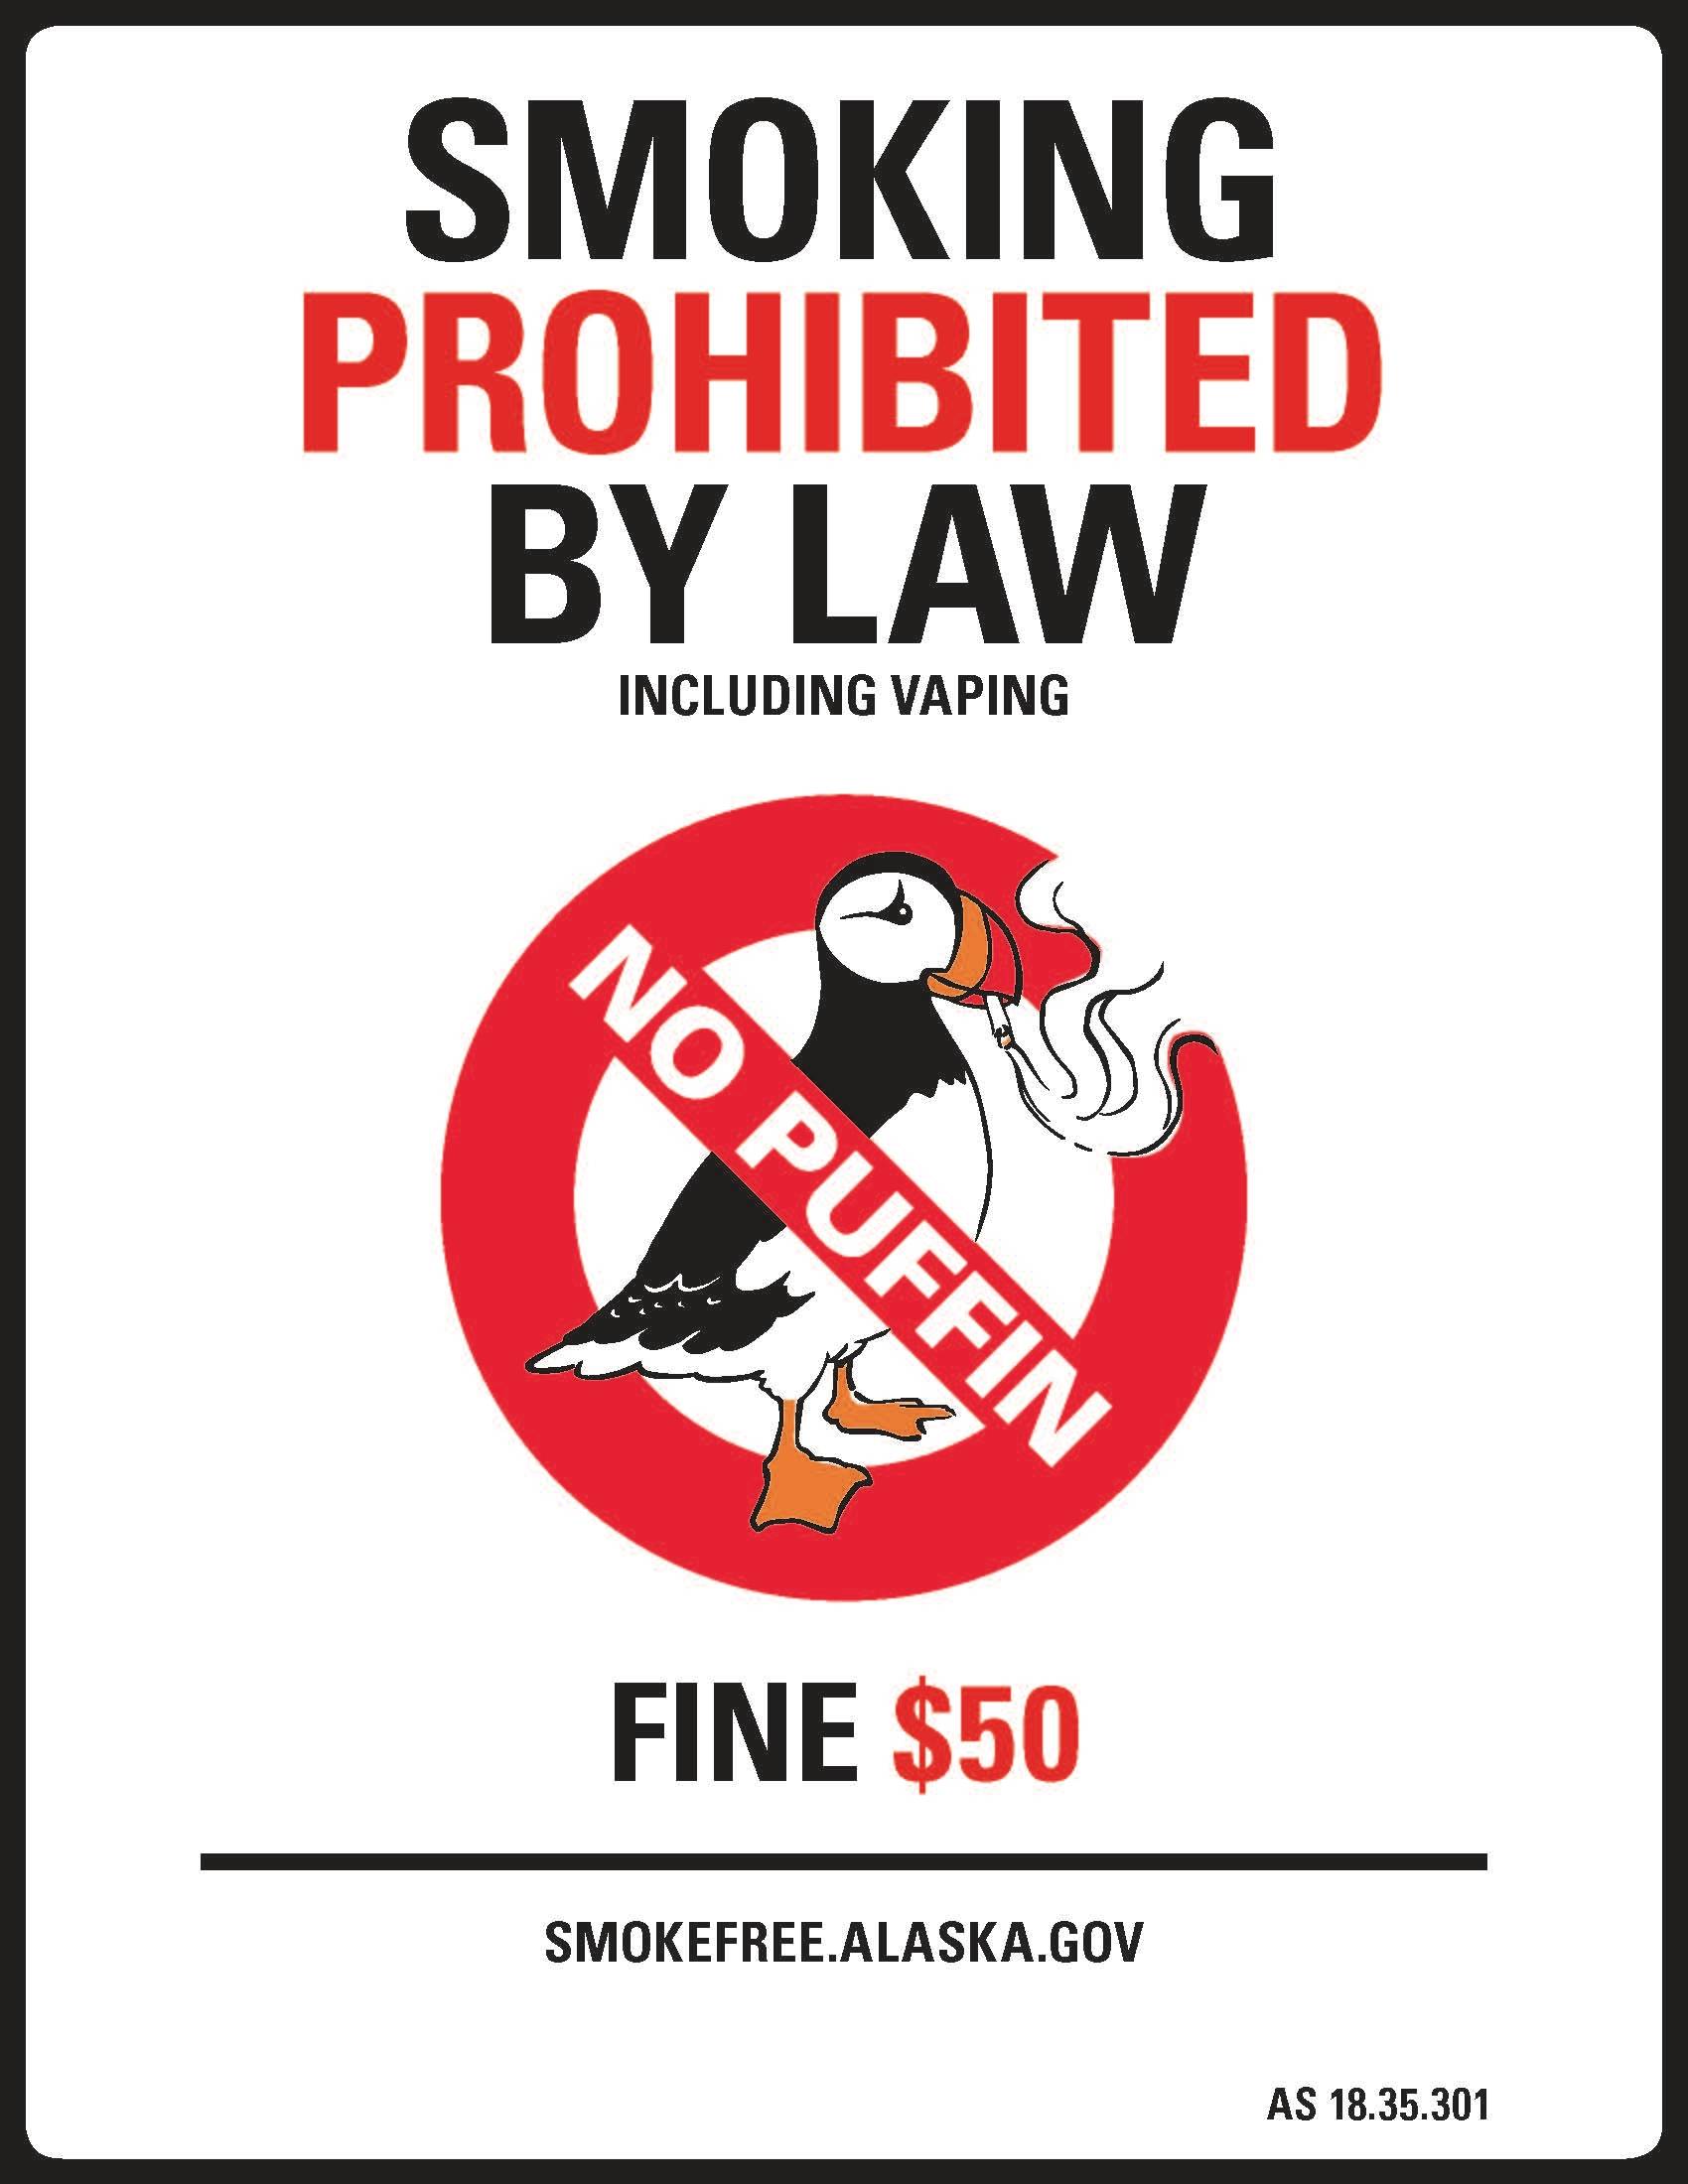 On Oct. 1, 2018, Alaska businesses will be required to put up signs like this available from the State of Alaska to indicate that workplaces are now smoke-free. (Image provided, State of Alaska)